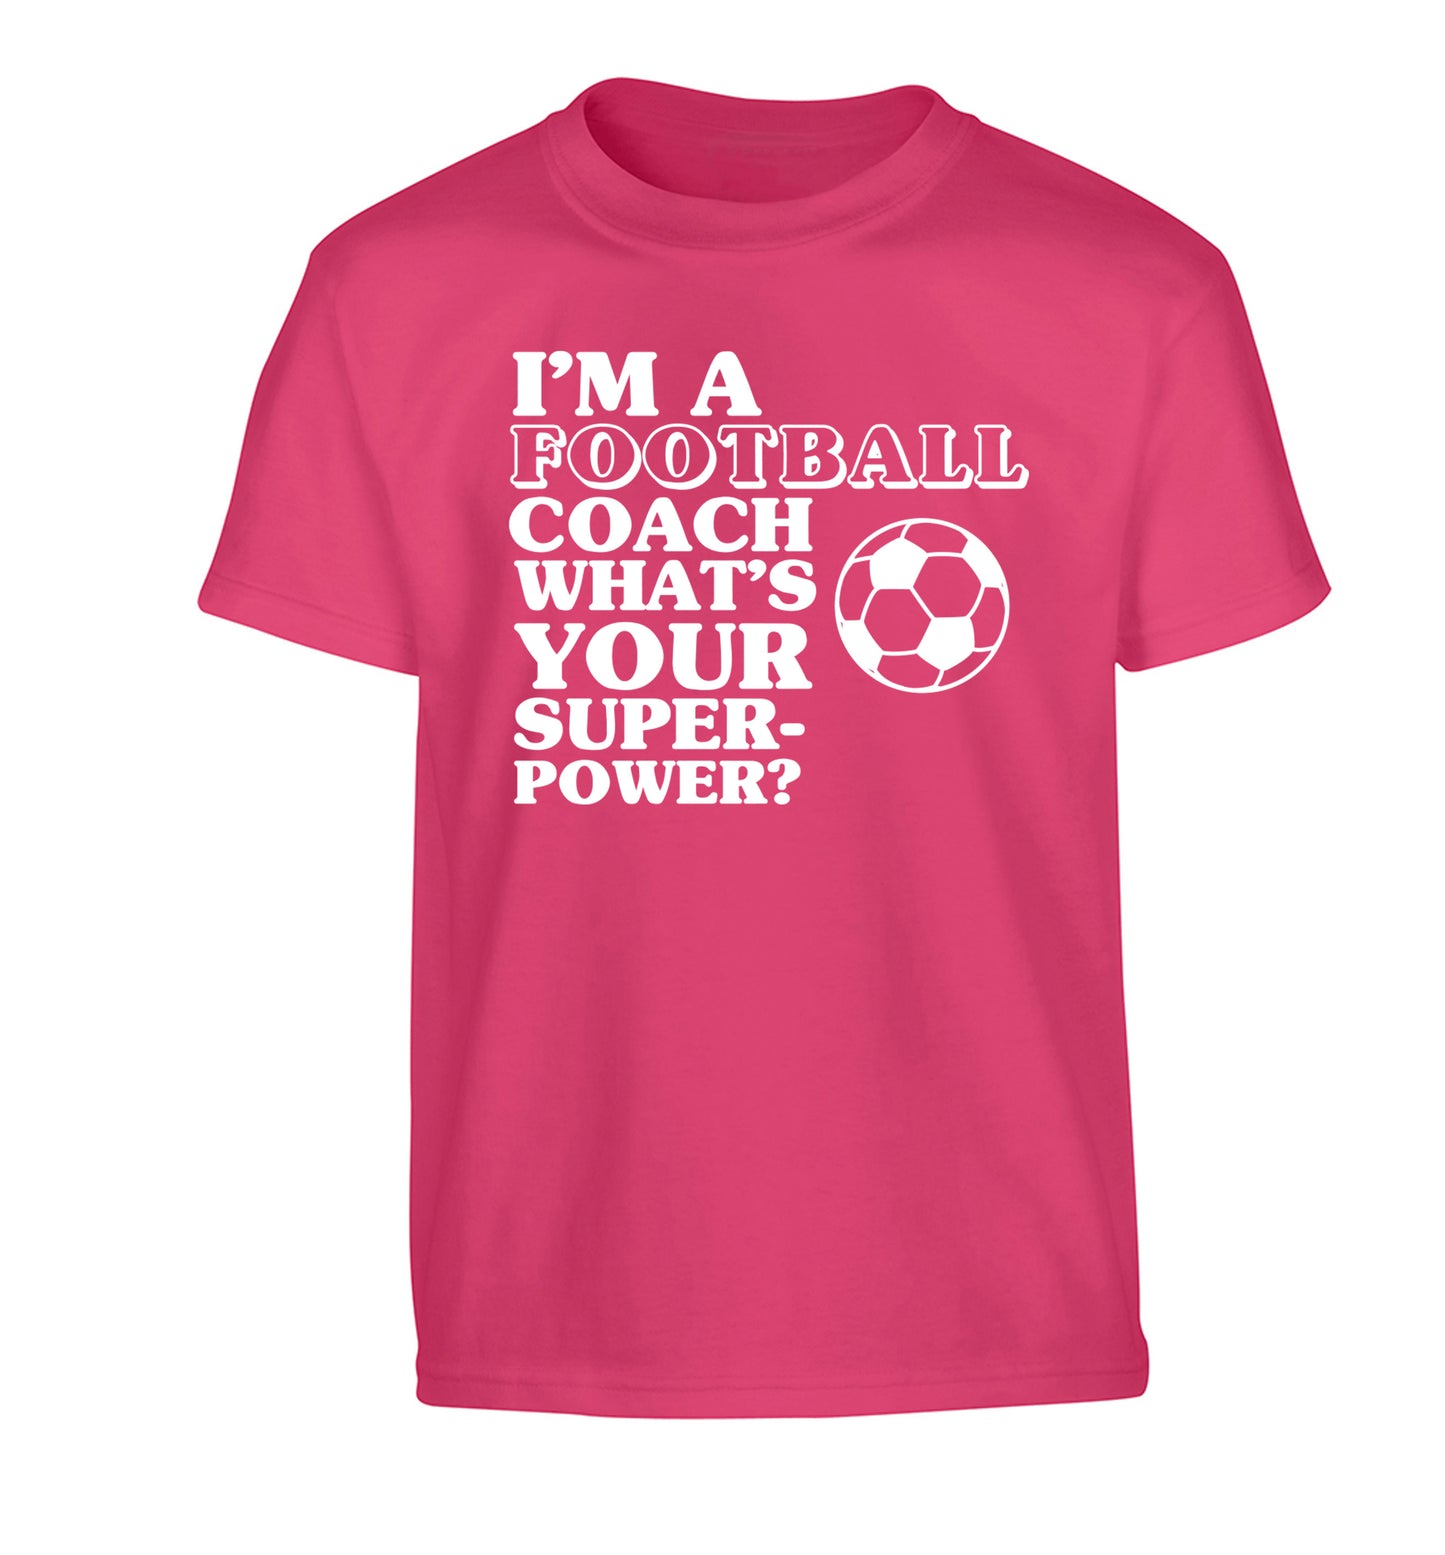 I'm a football coach what's your superpower? Children's pink Tshirt 12-14 Years